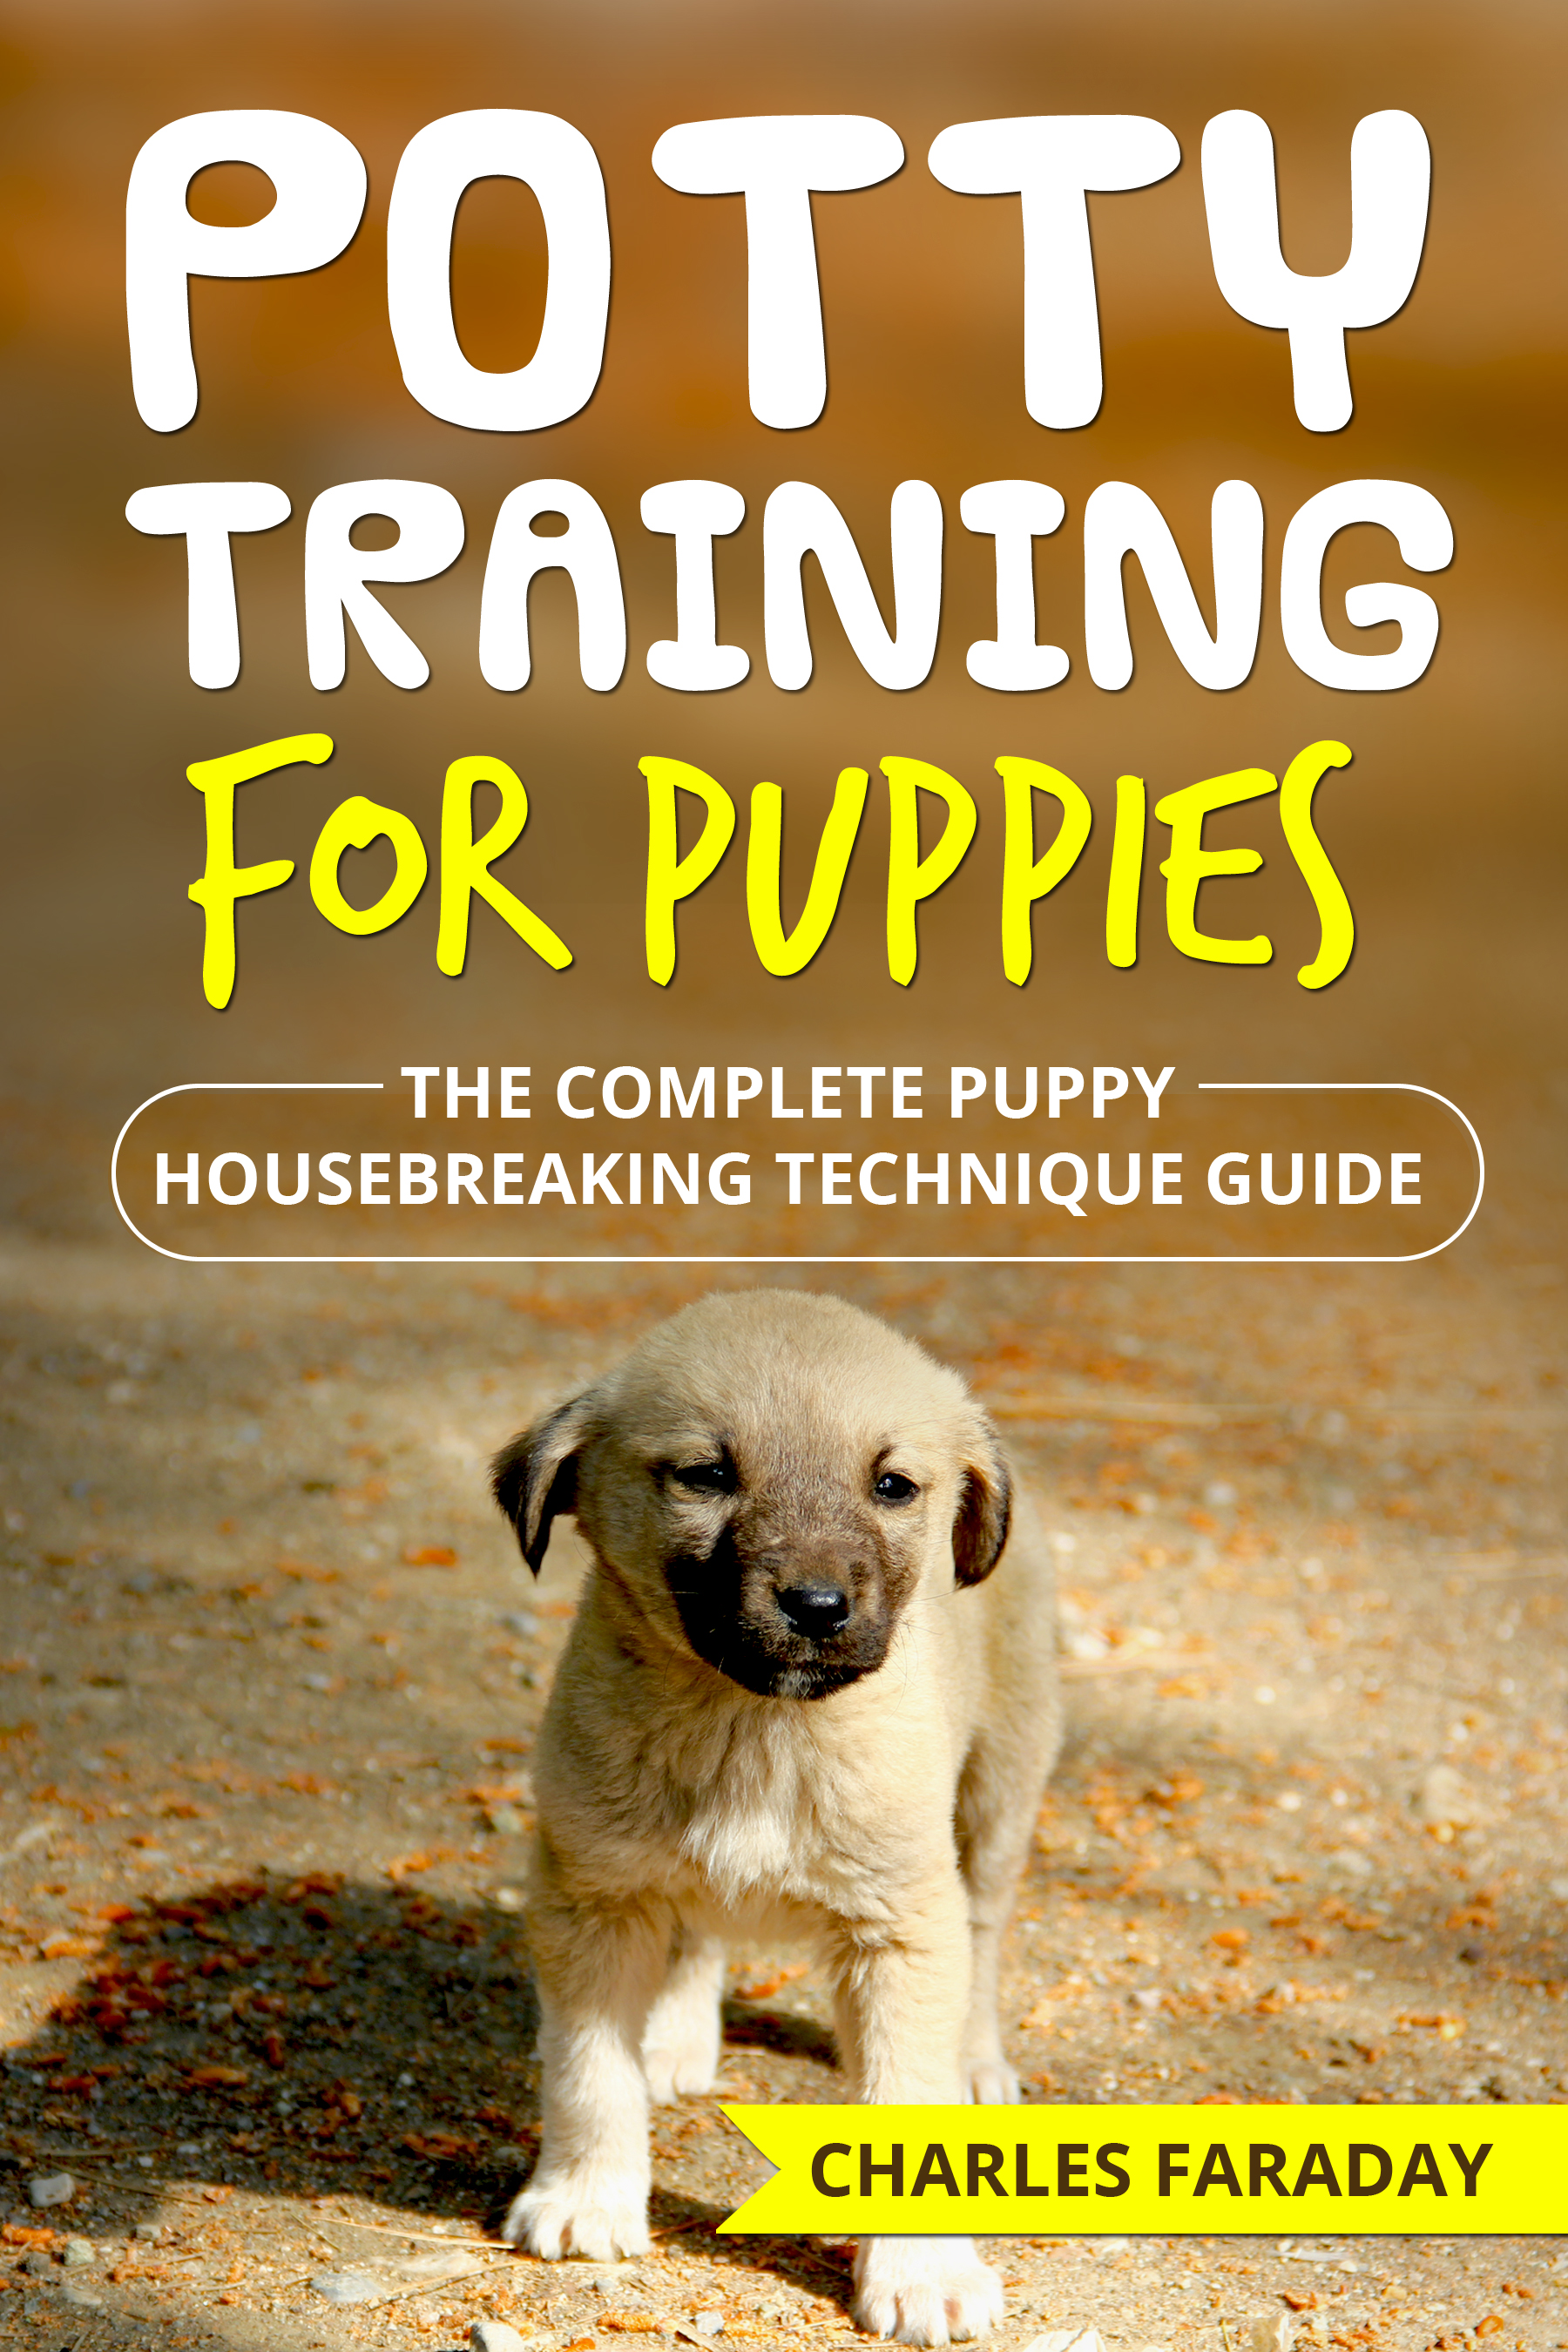 FREE: Potty Training For Puppies: The Complete Housebreaking Technique Guide by Charles Faraday